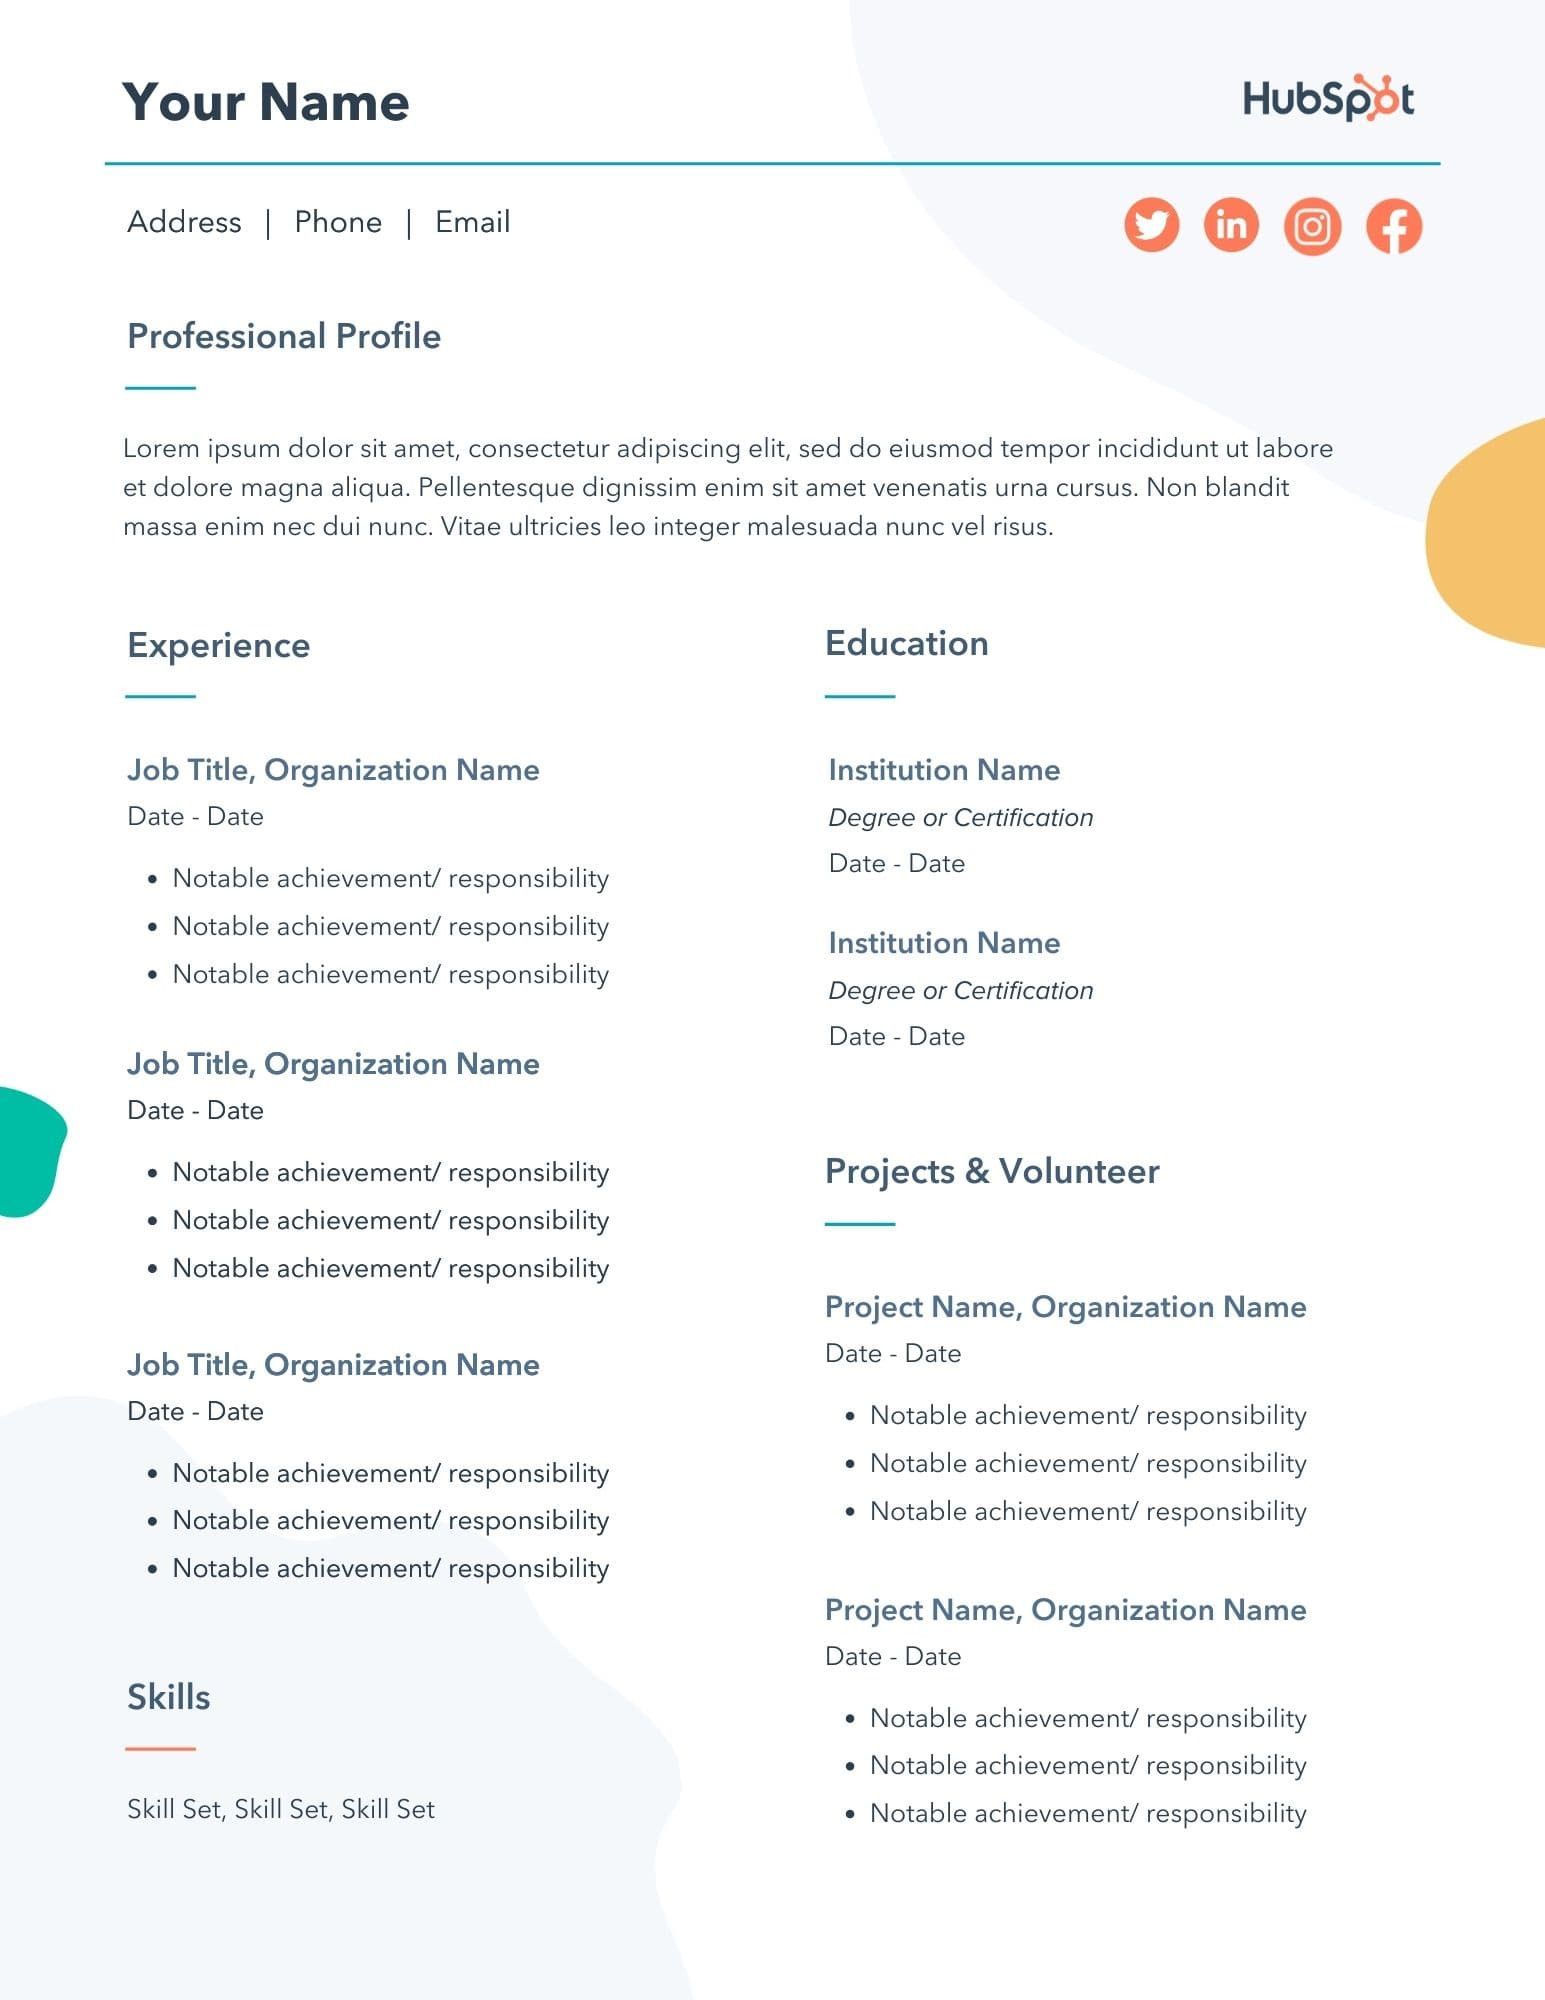 Resume Template with Only One Job 29 Free Resume Templates for Microsoft Word (& How to Make Your Own)